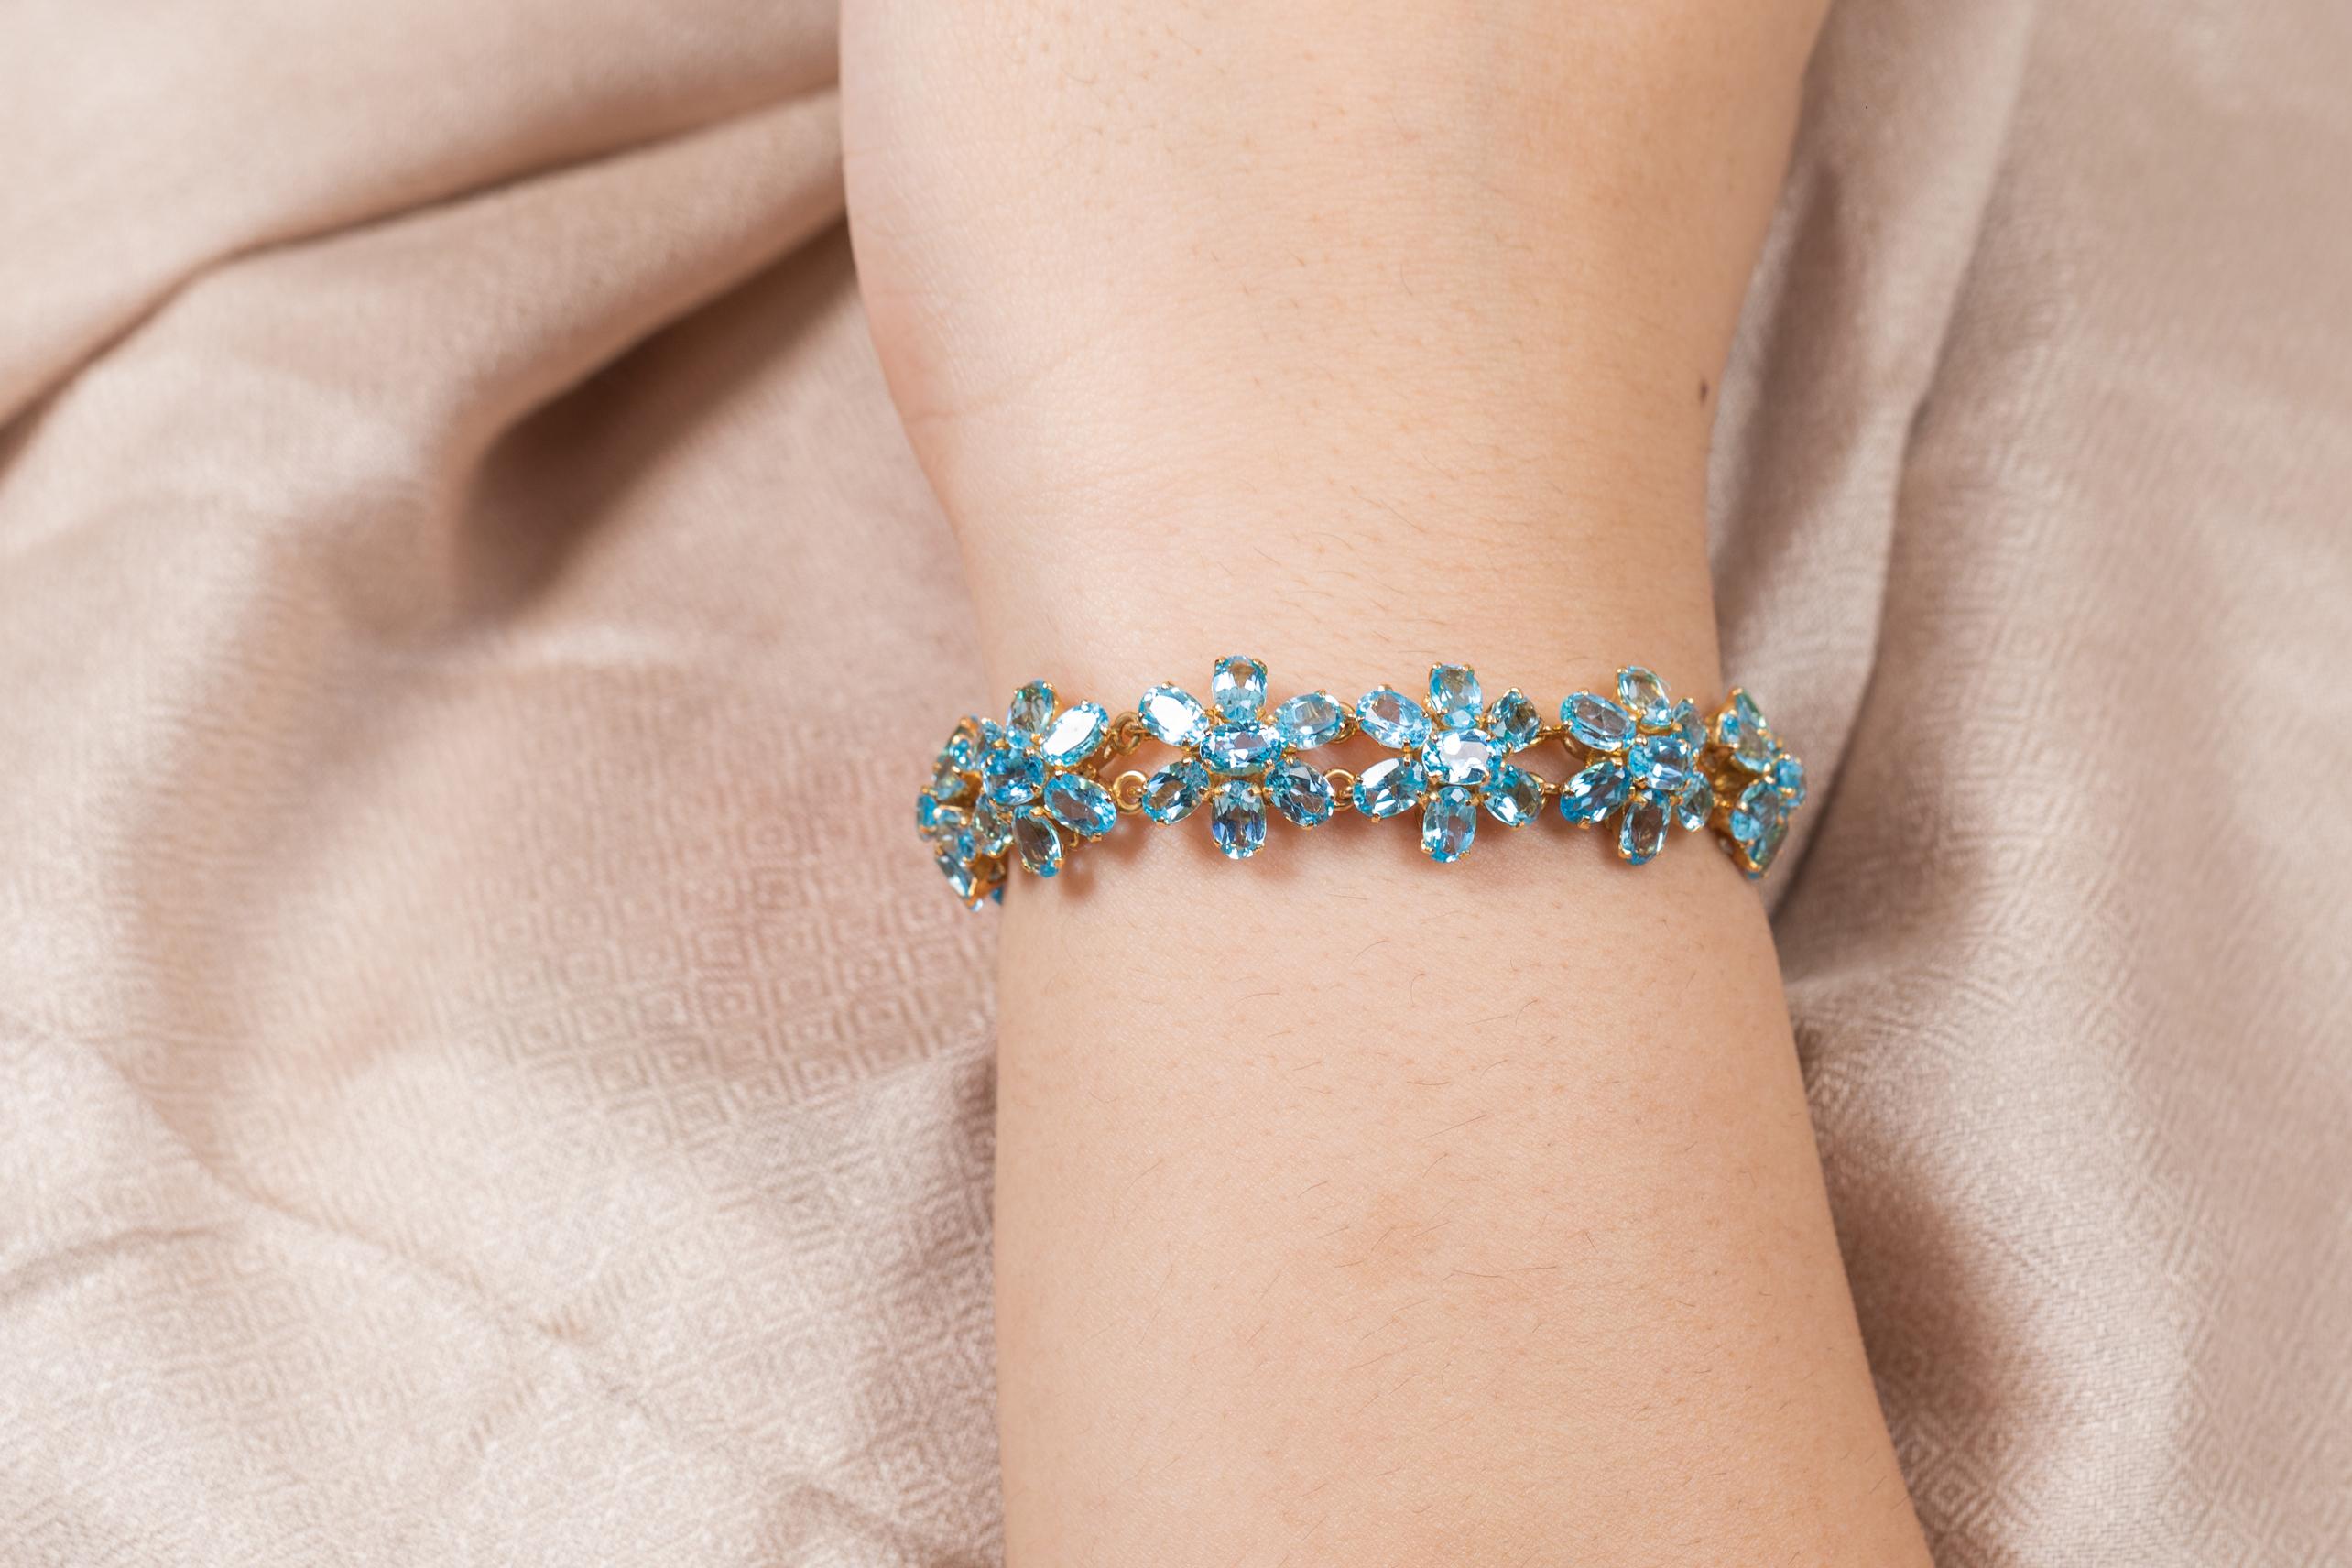 This Blue Topaz Flower Bracelet in 18K gold showcases 77 endlessly sparkling natural blue topaz, weighing 38.1 carats. It measures 7.5 inches long in length. 
Blue topaz helps to improve communication and self expression. 
Designed with perfect